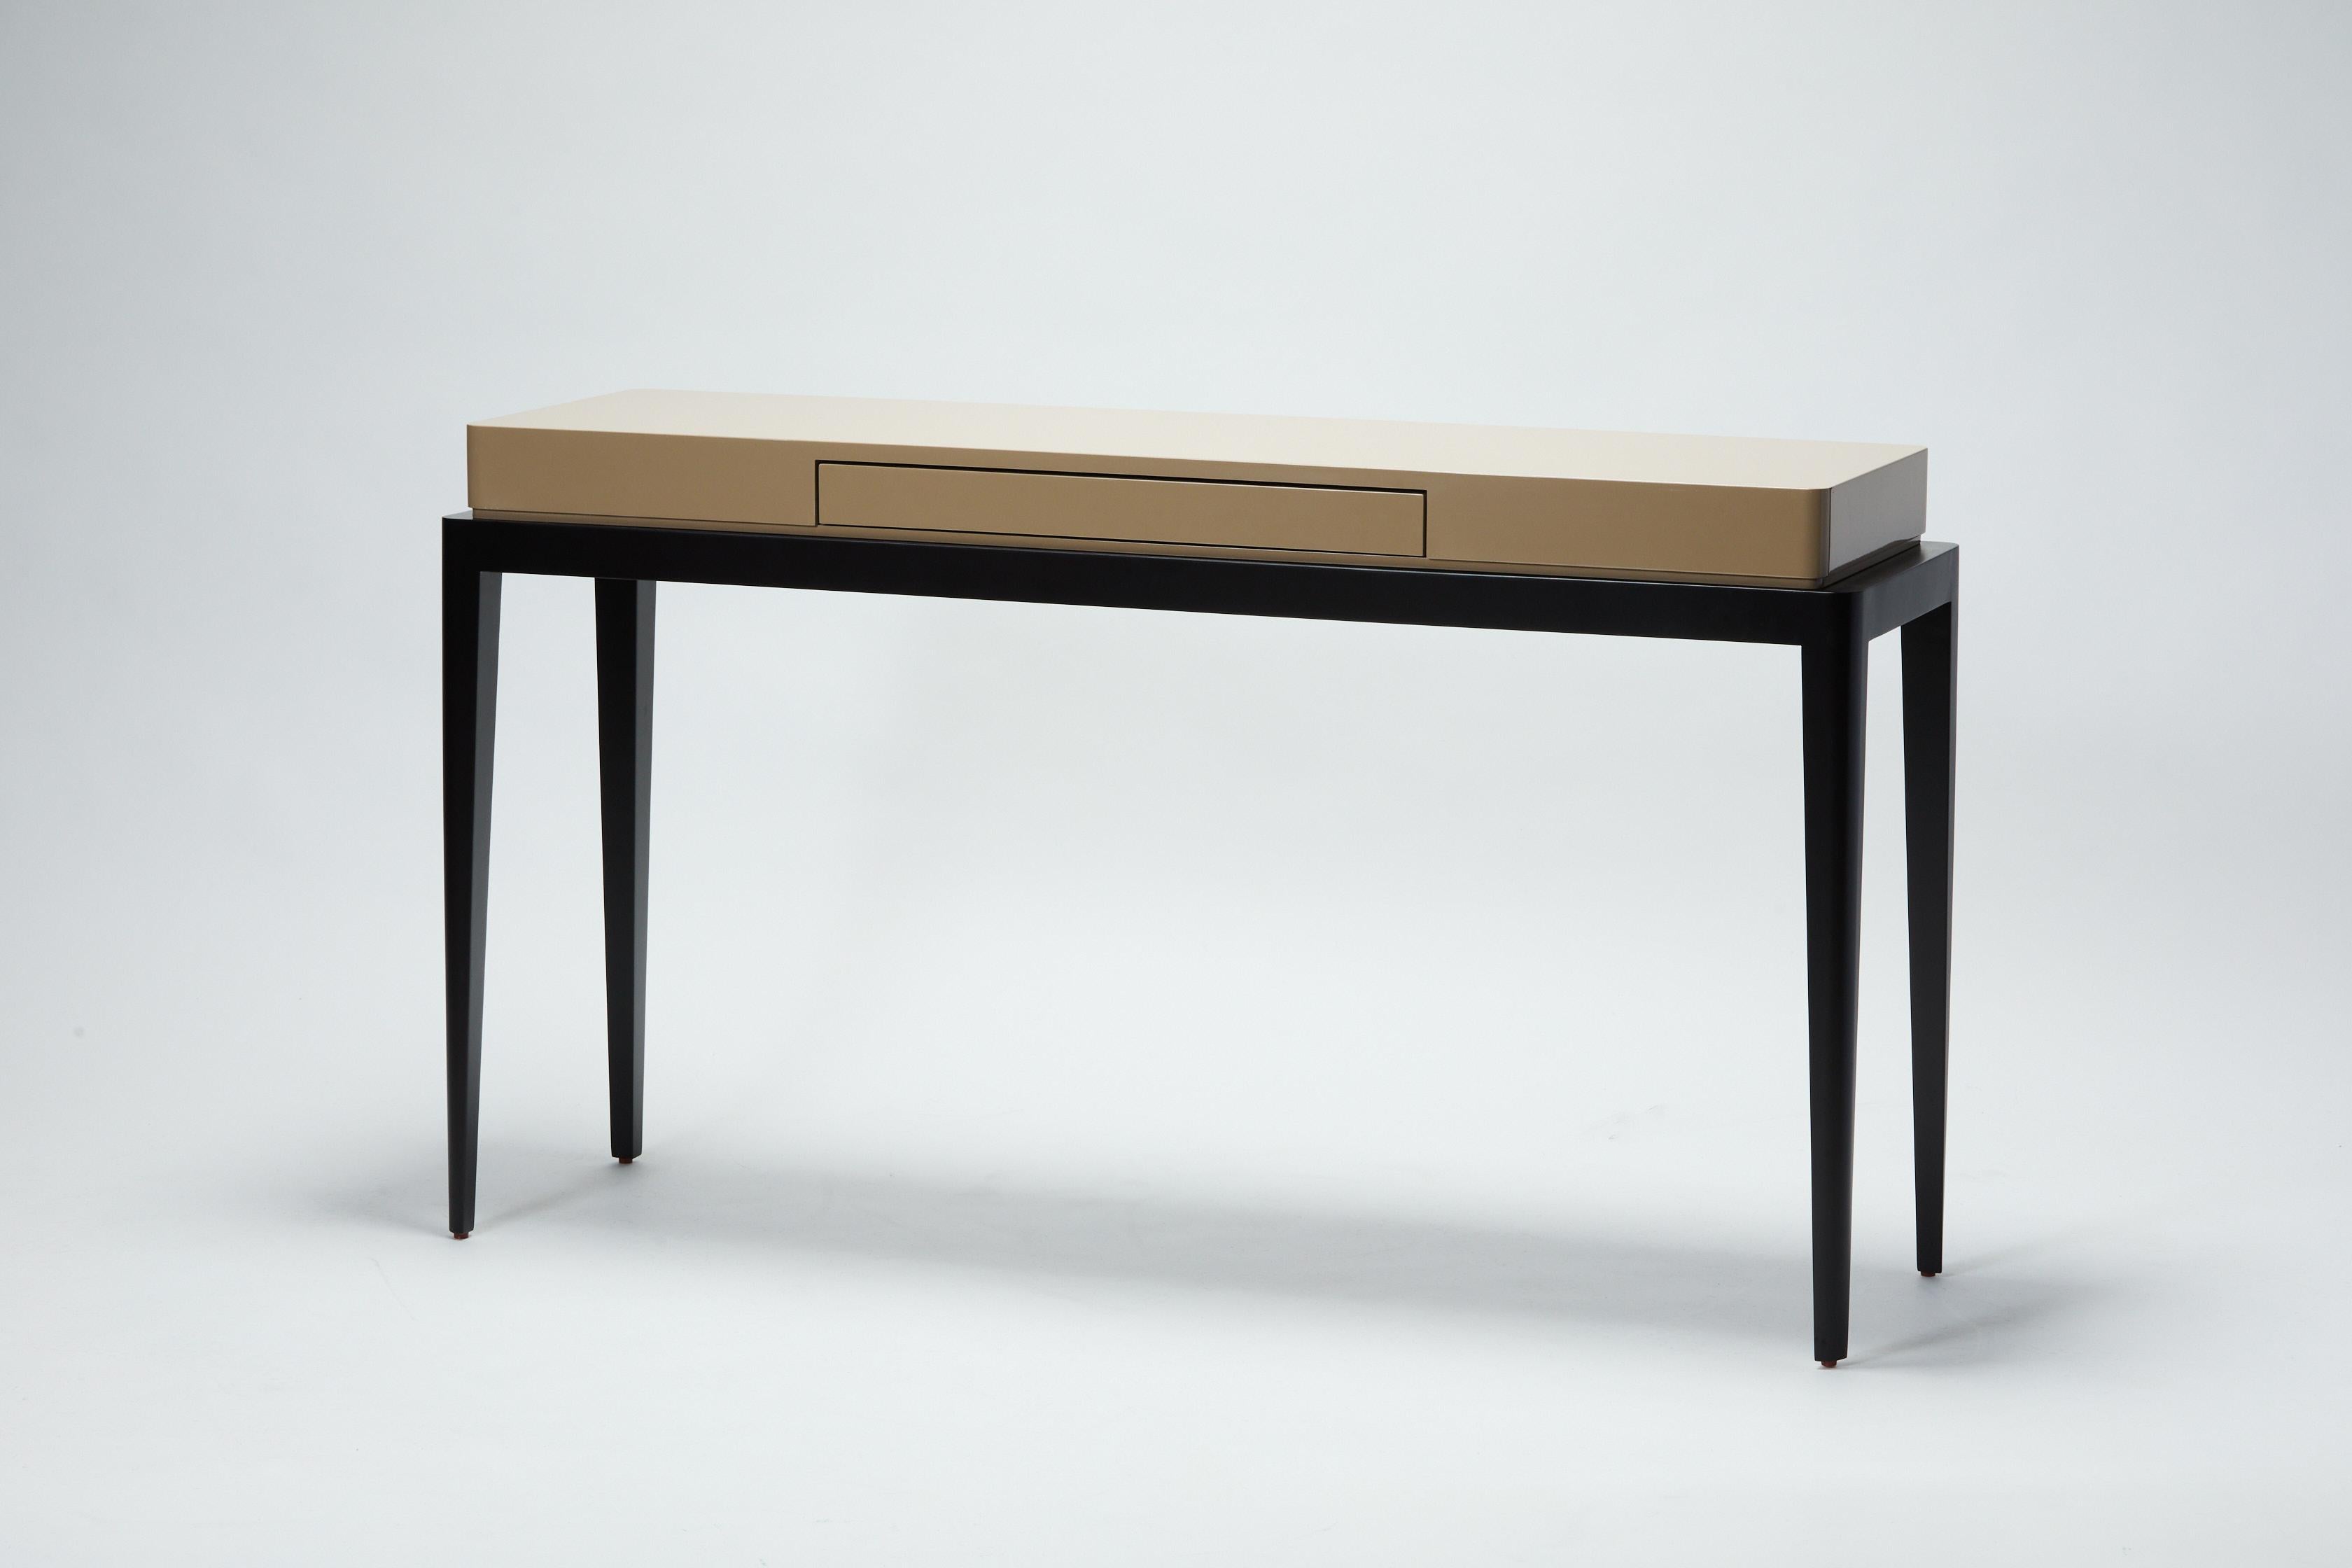 The perfect console; Size: 140cm
Flat surface, smooth, purity of the line only asking to be inhabited. If it is a
console or a desk, TARA is a piece that distinguish itself with the power of its
minimalism. It is enough to dress up any interior. The